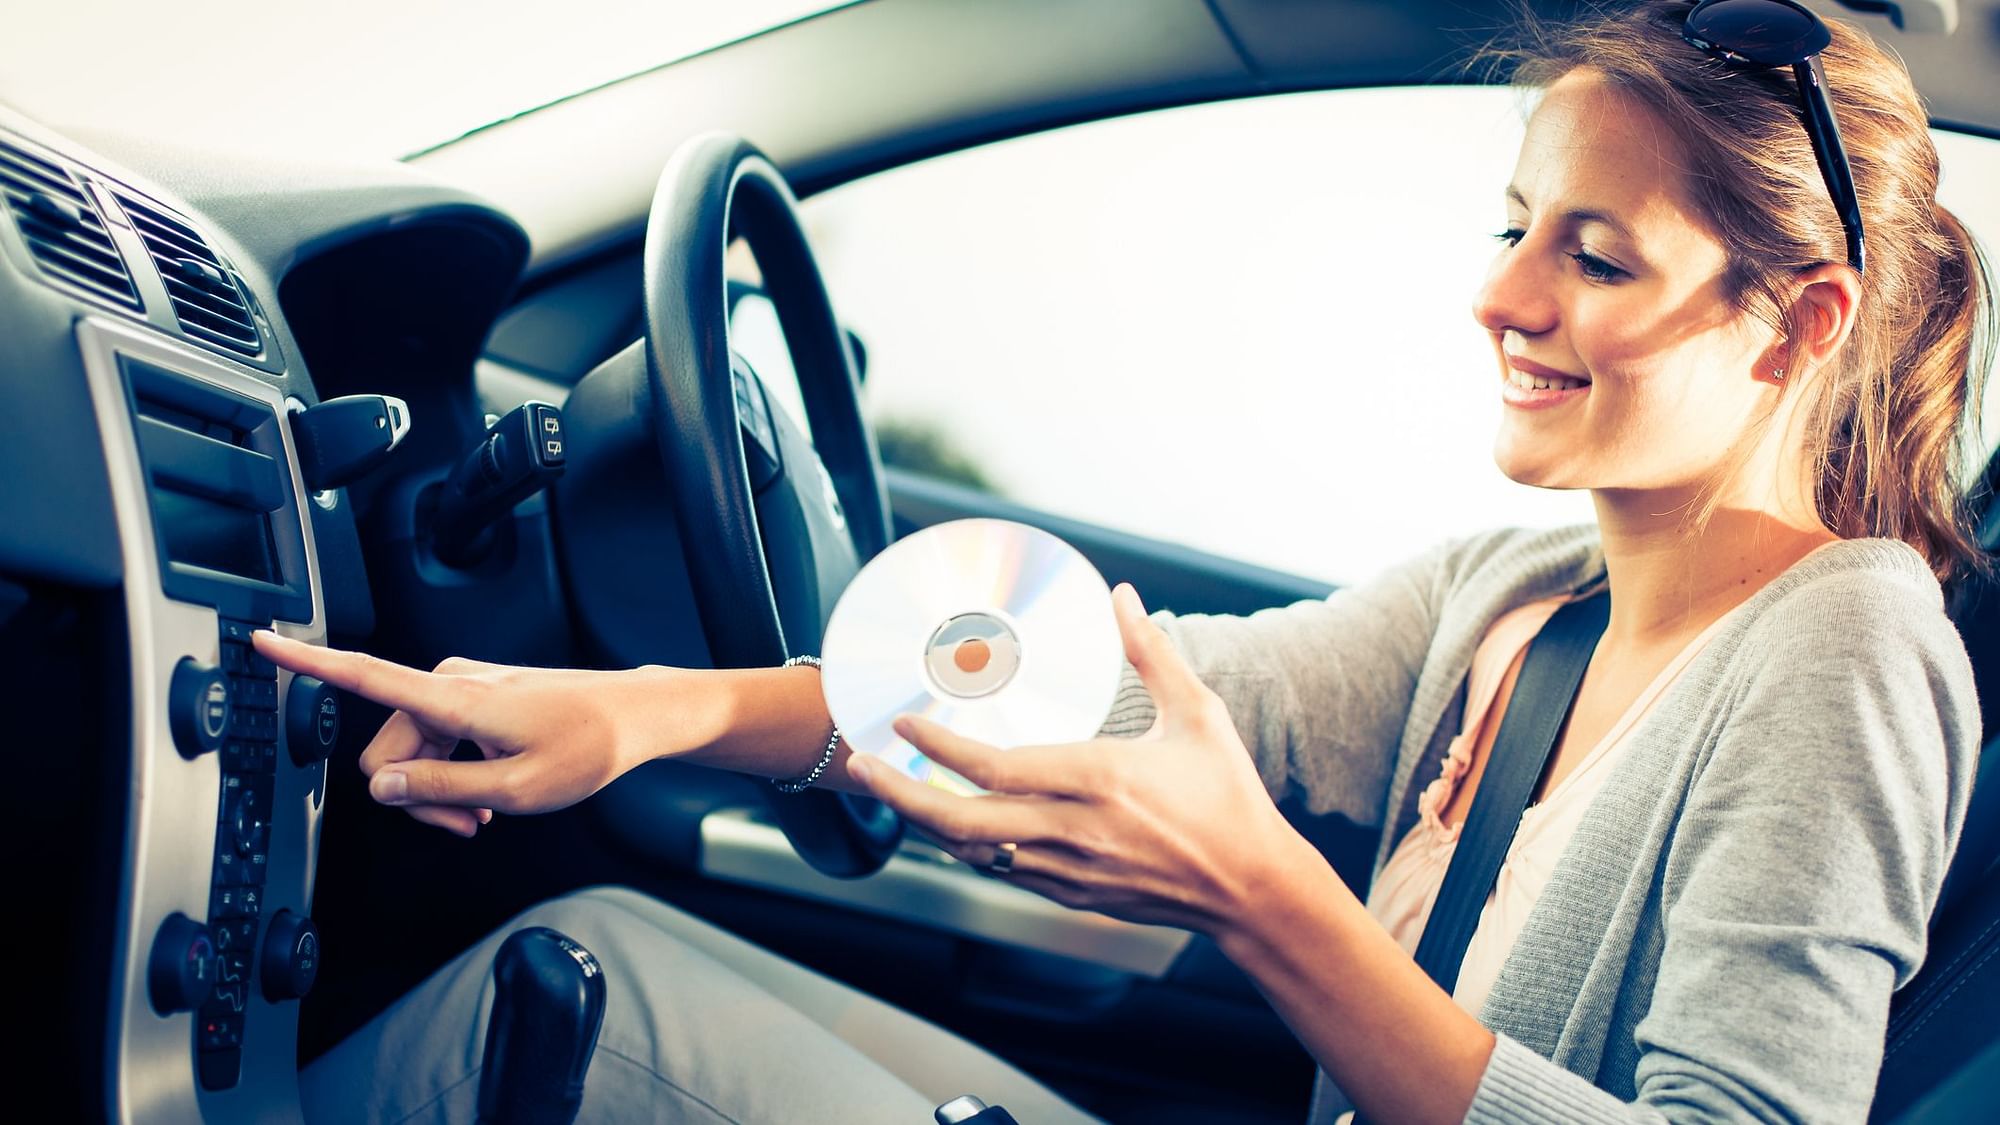 Music may reduce cardiac stress while driving: Study&nbsp;